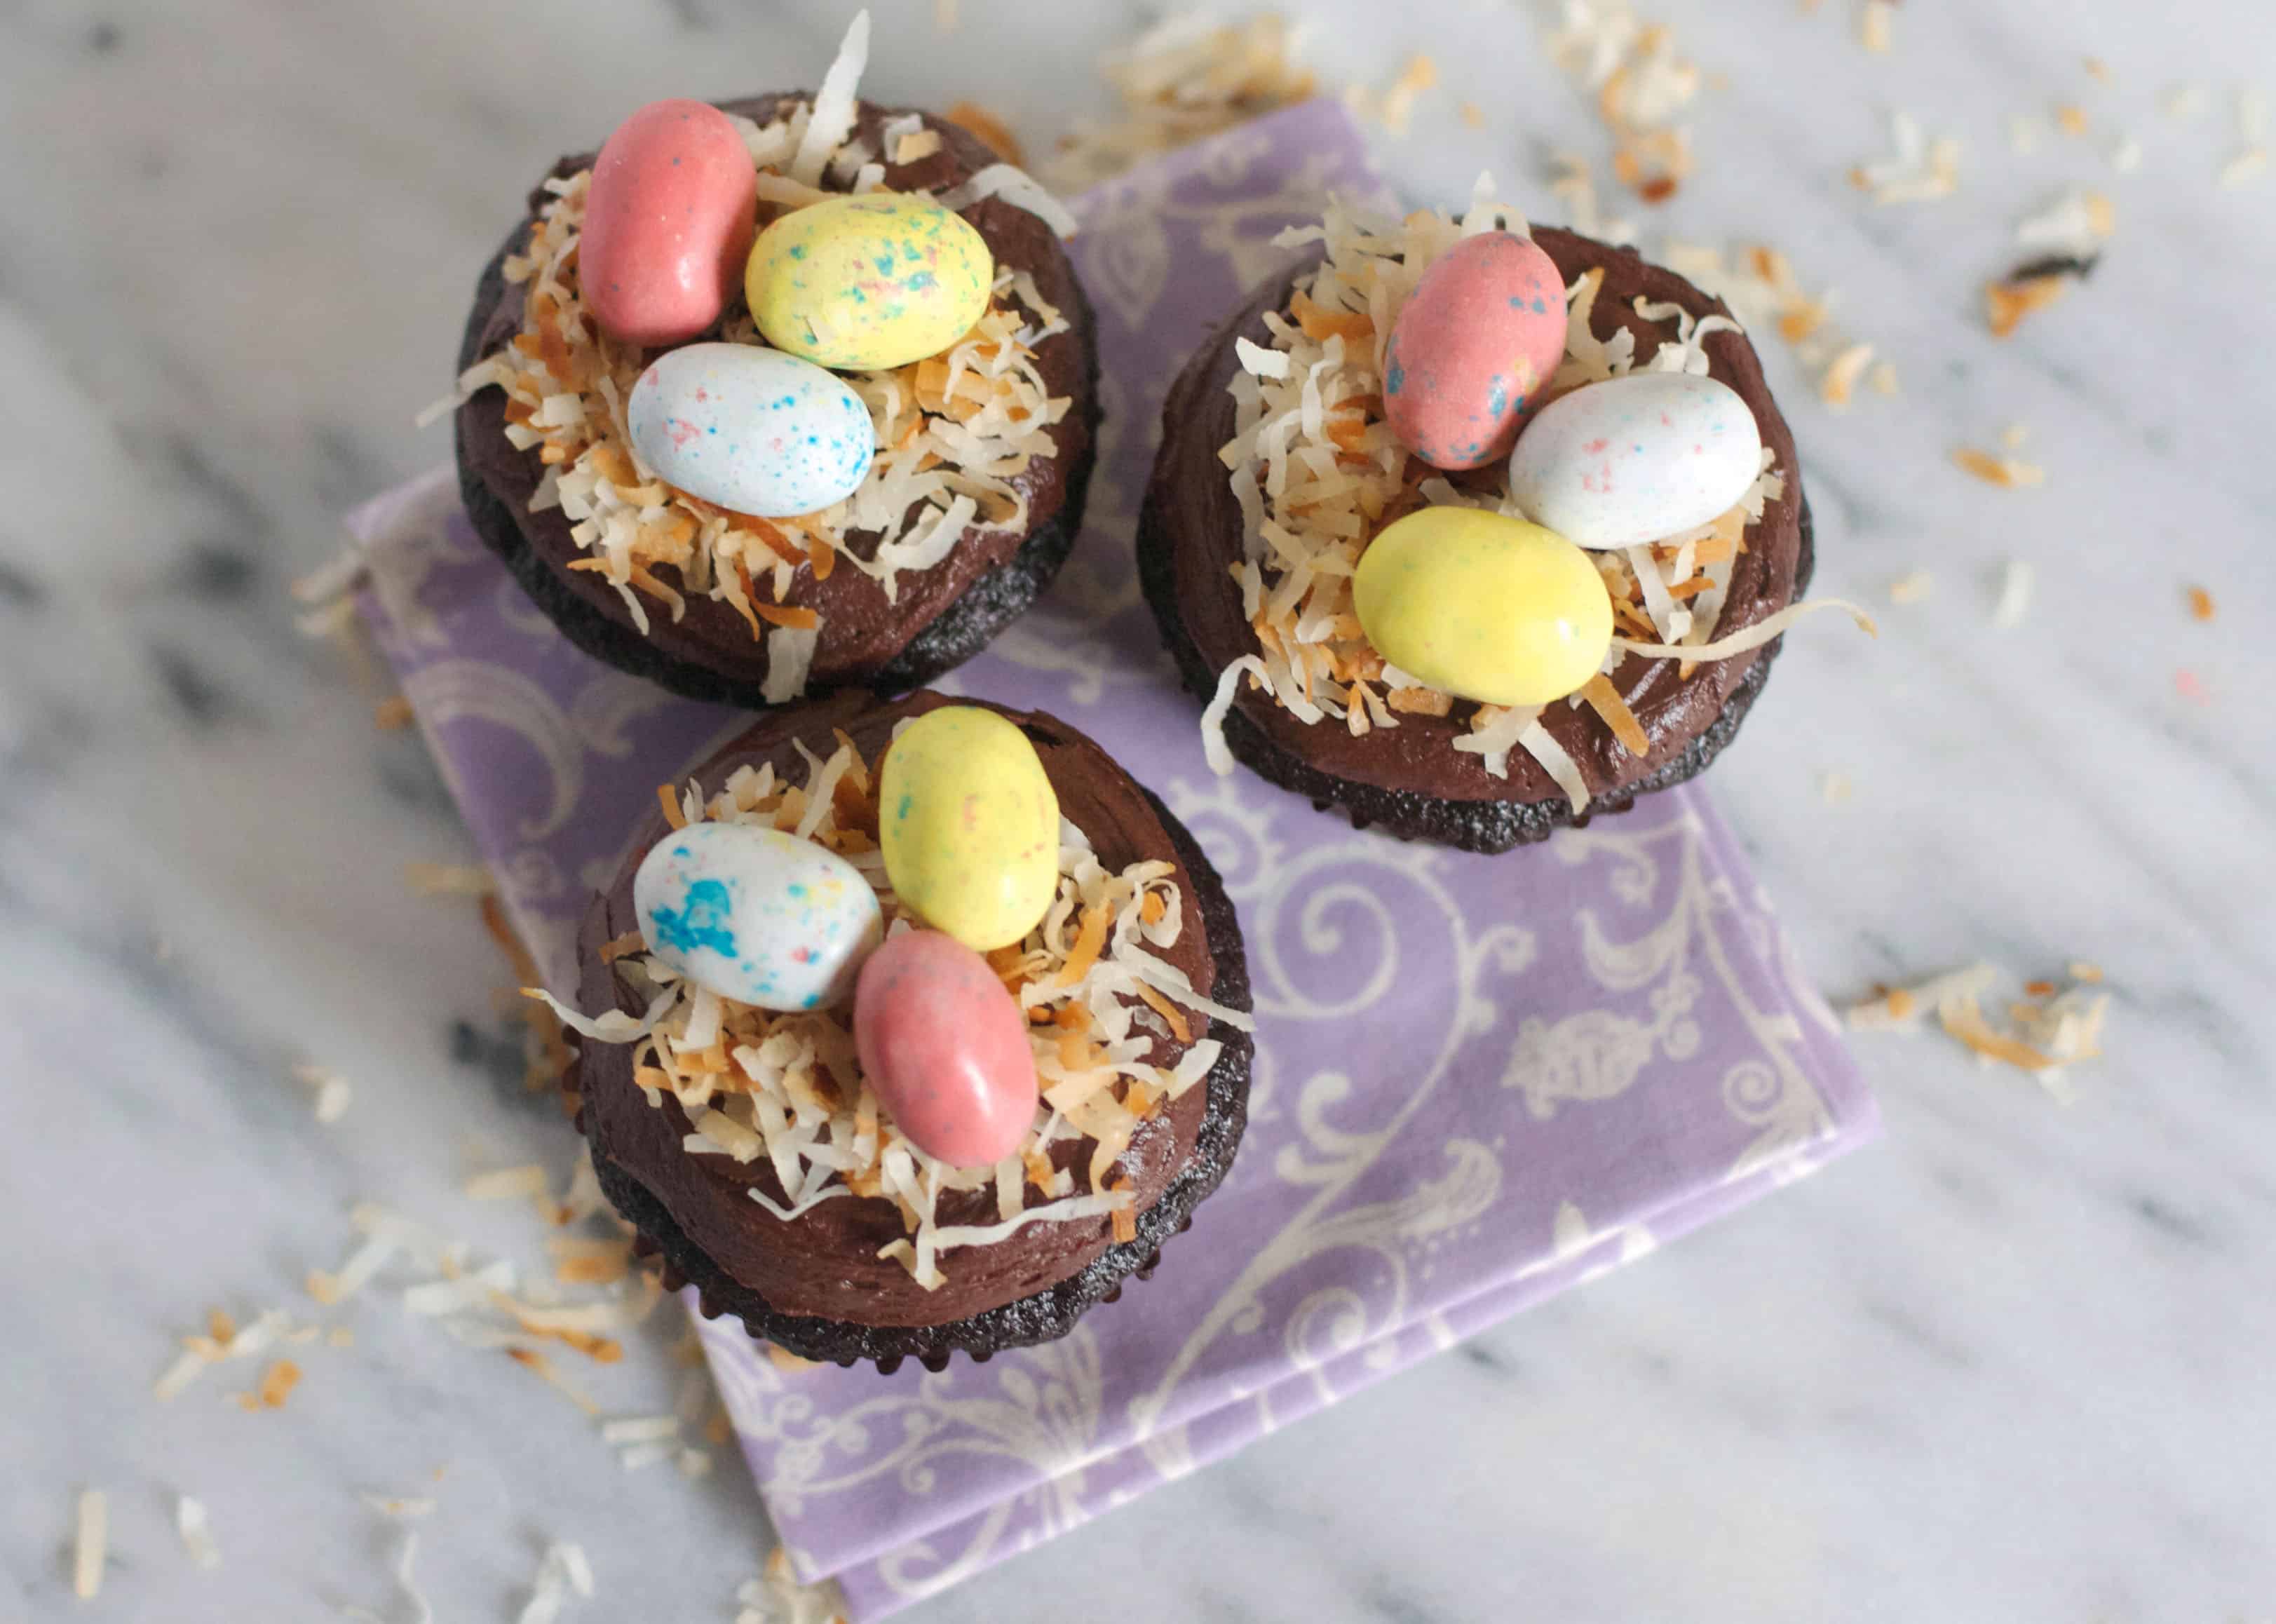 Chocolate “Easter Nest” Cupcakes